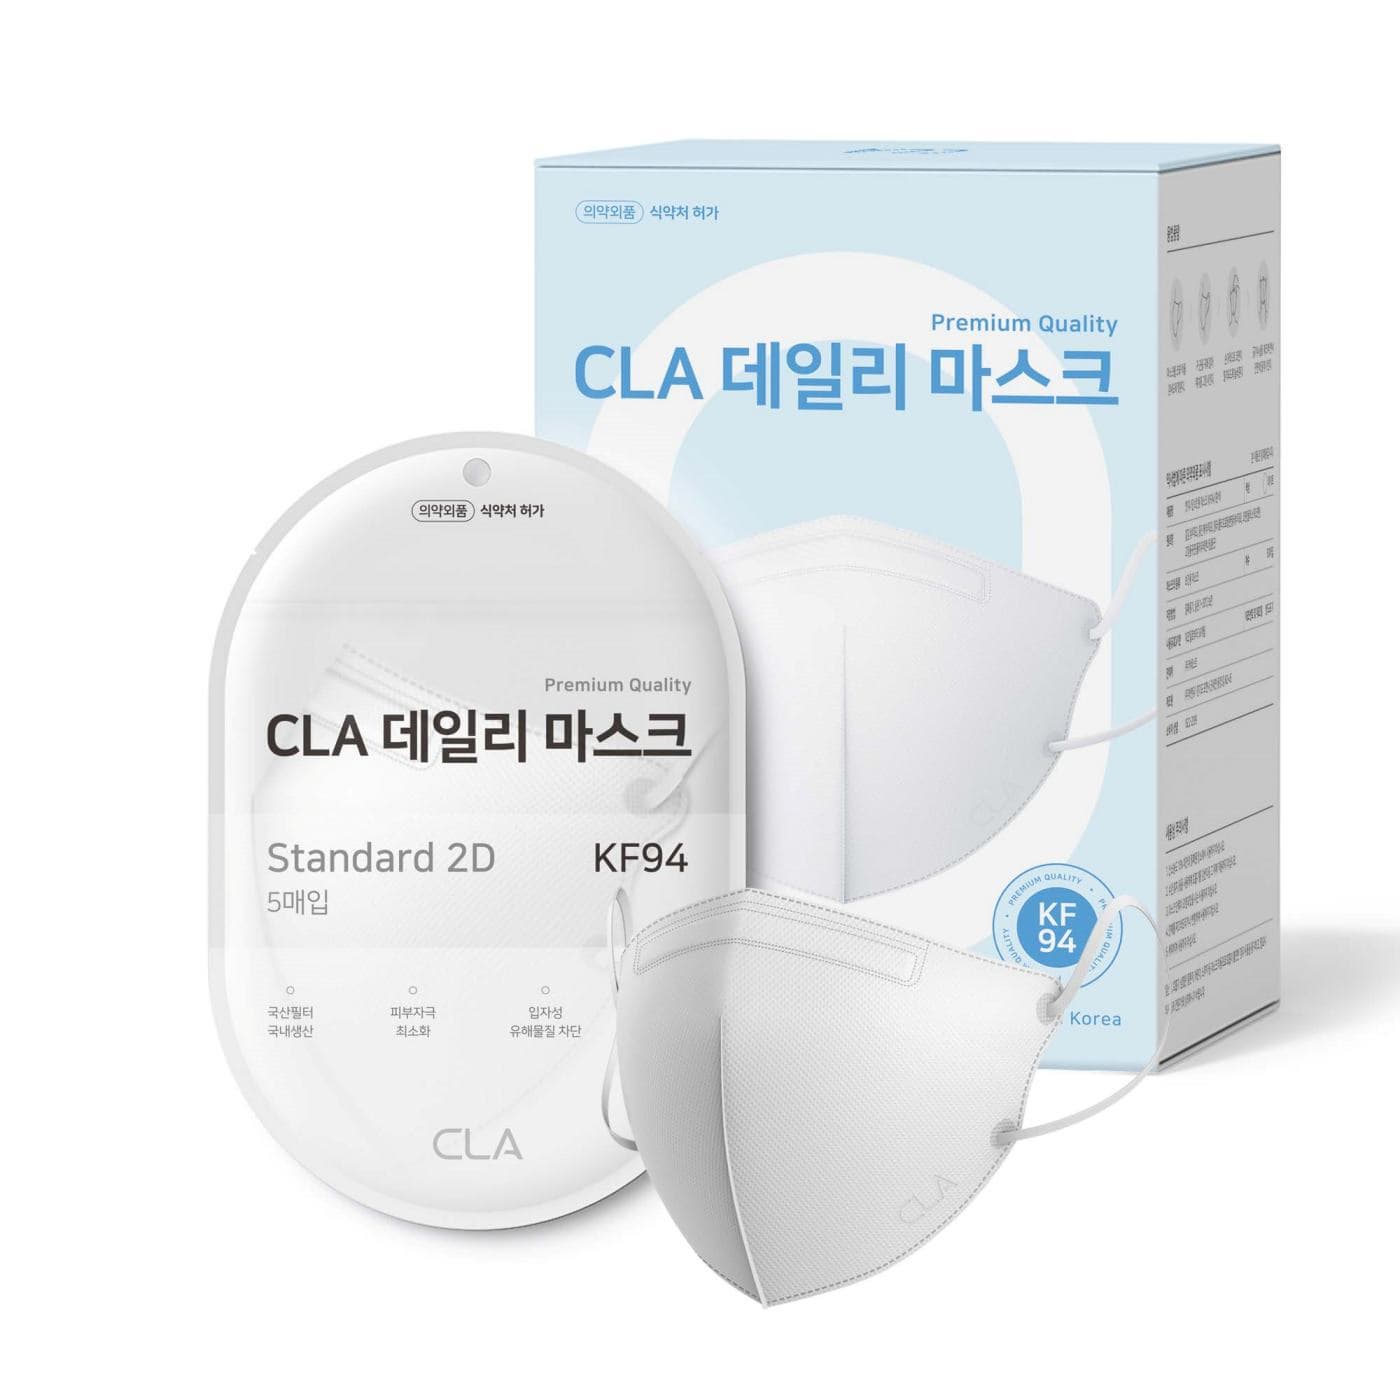 CLA KF94 Disposable Face Masks _ 25_50 Pack Individually Wrapped Masks